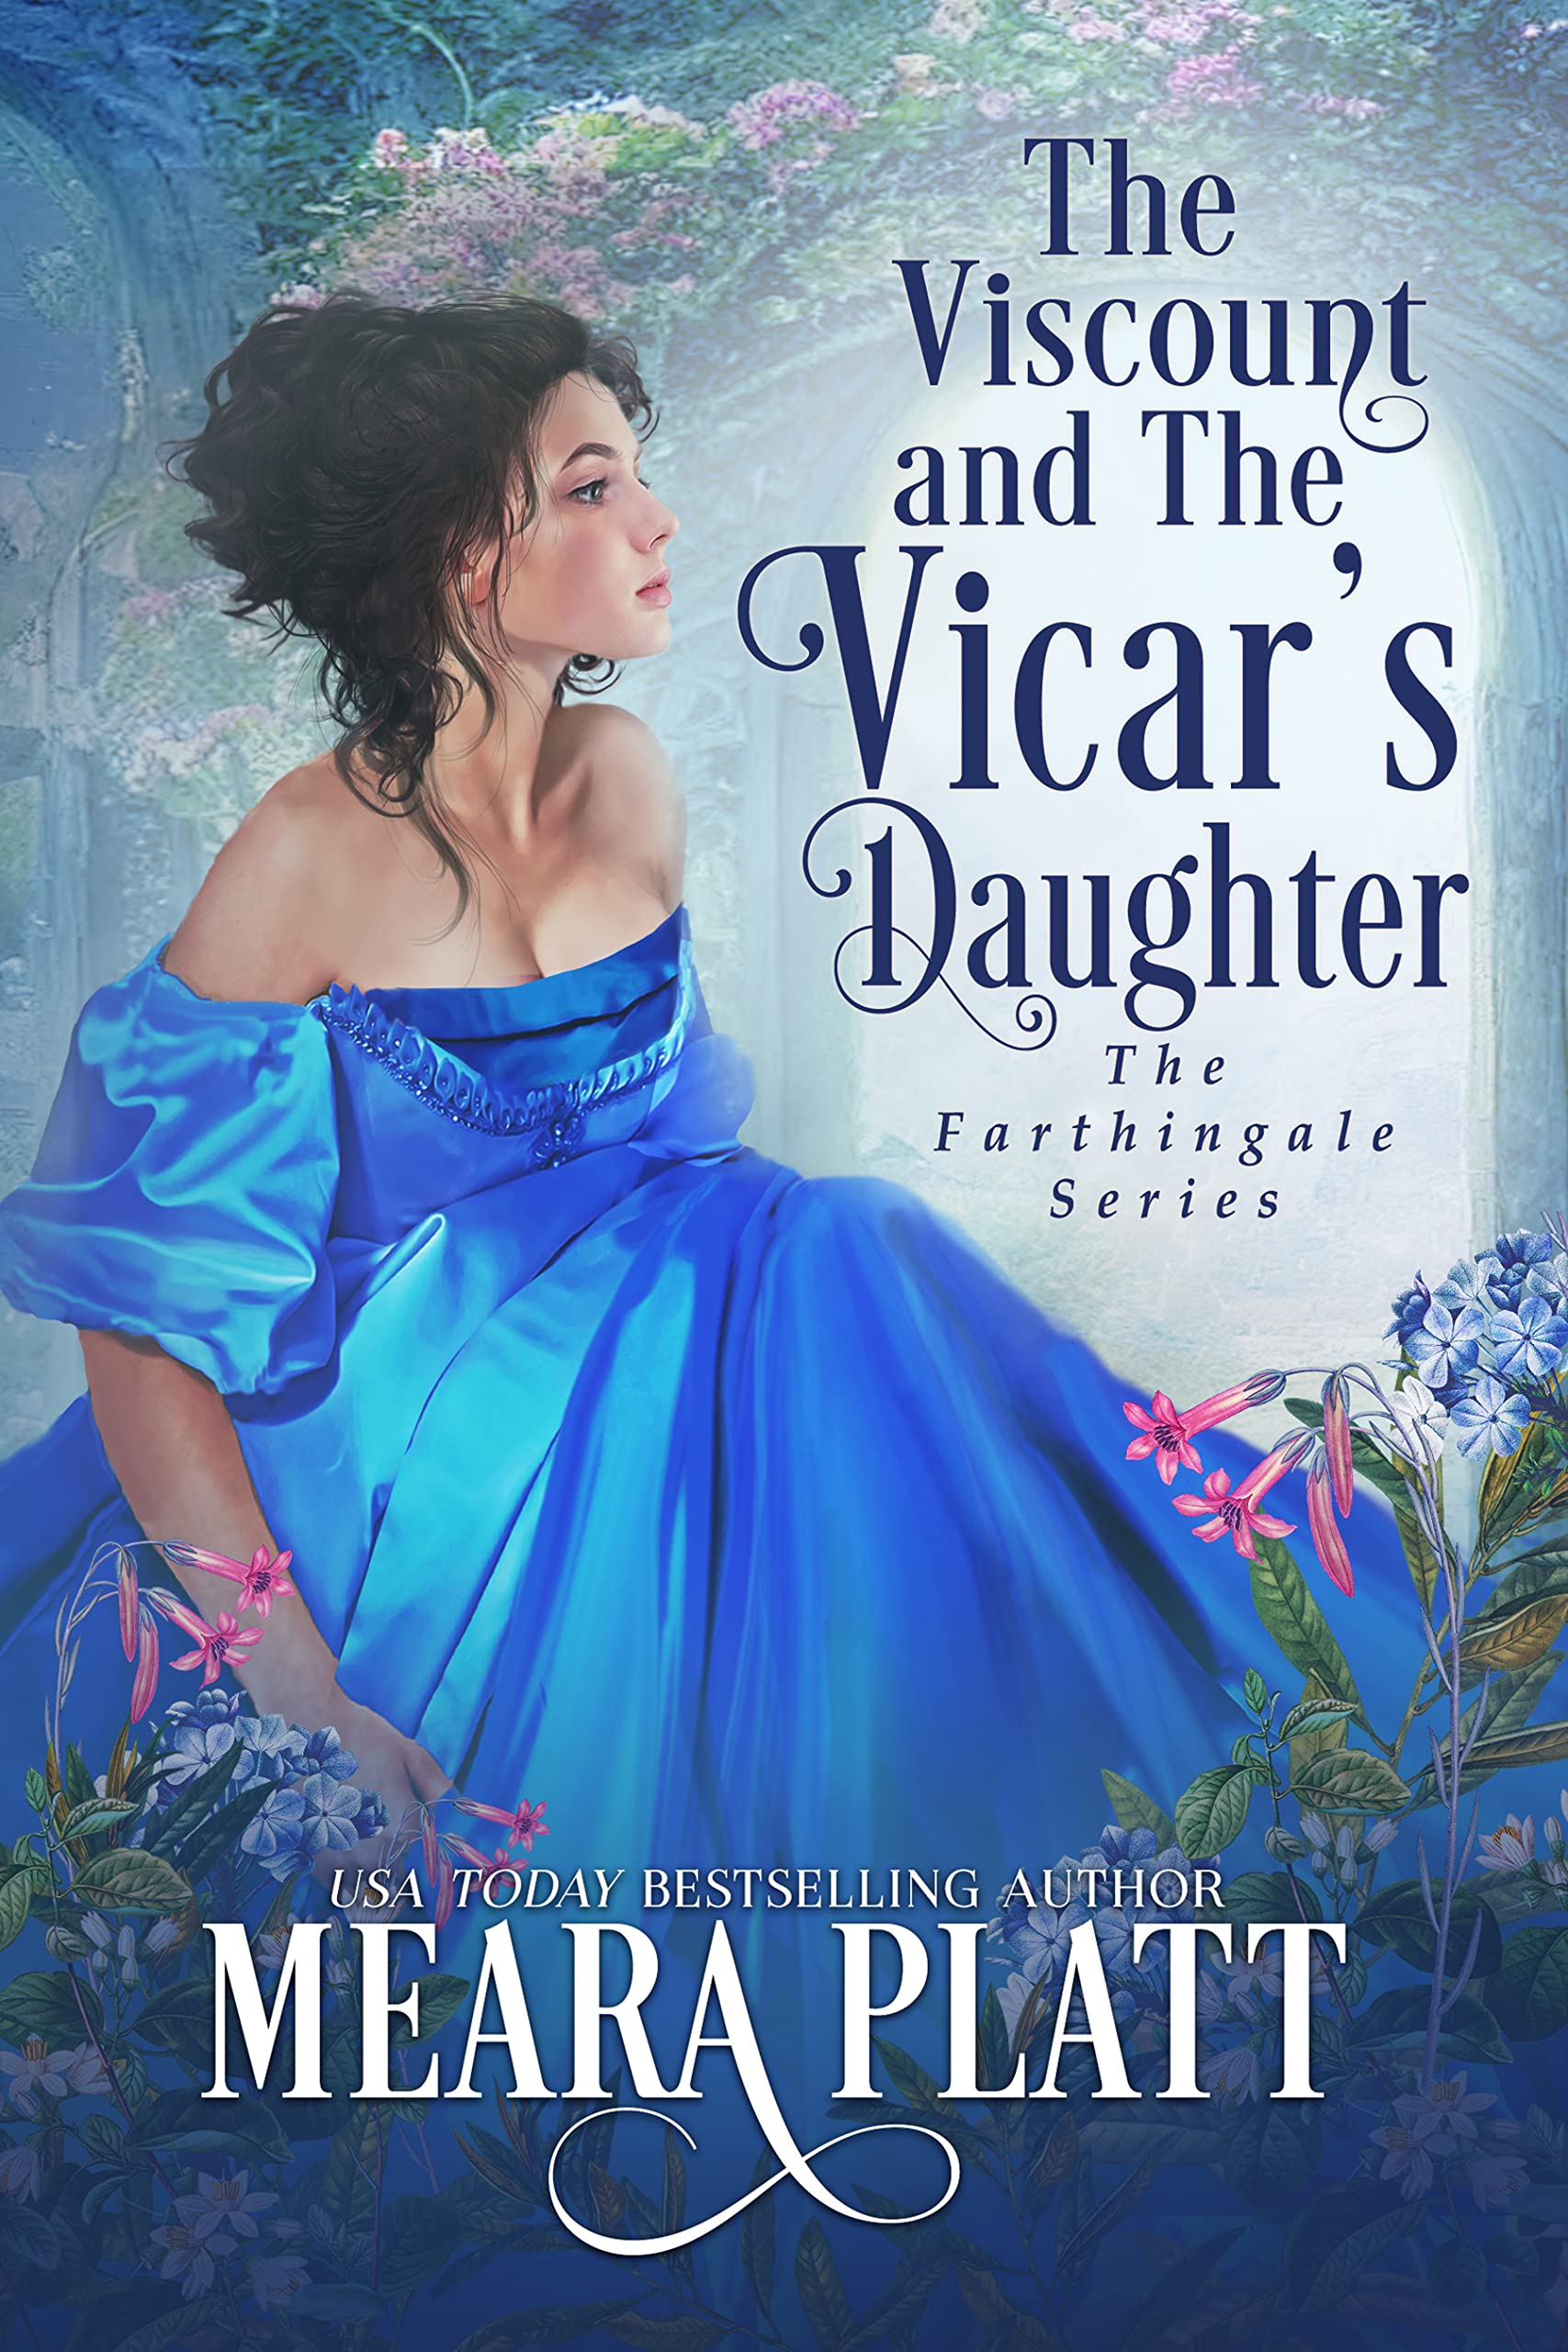 The Viscount and the Vicar’s Daughter by Meara Platt PDF Download Audio Book 